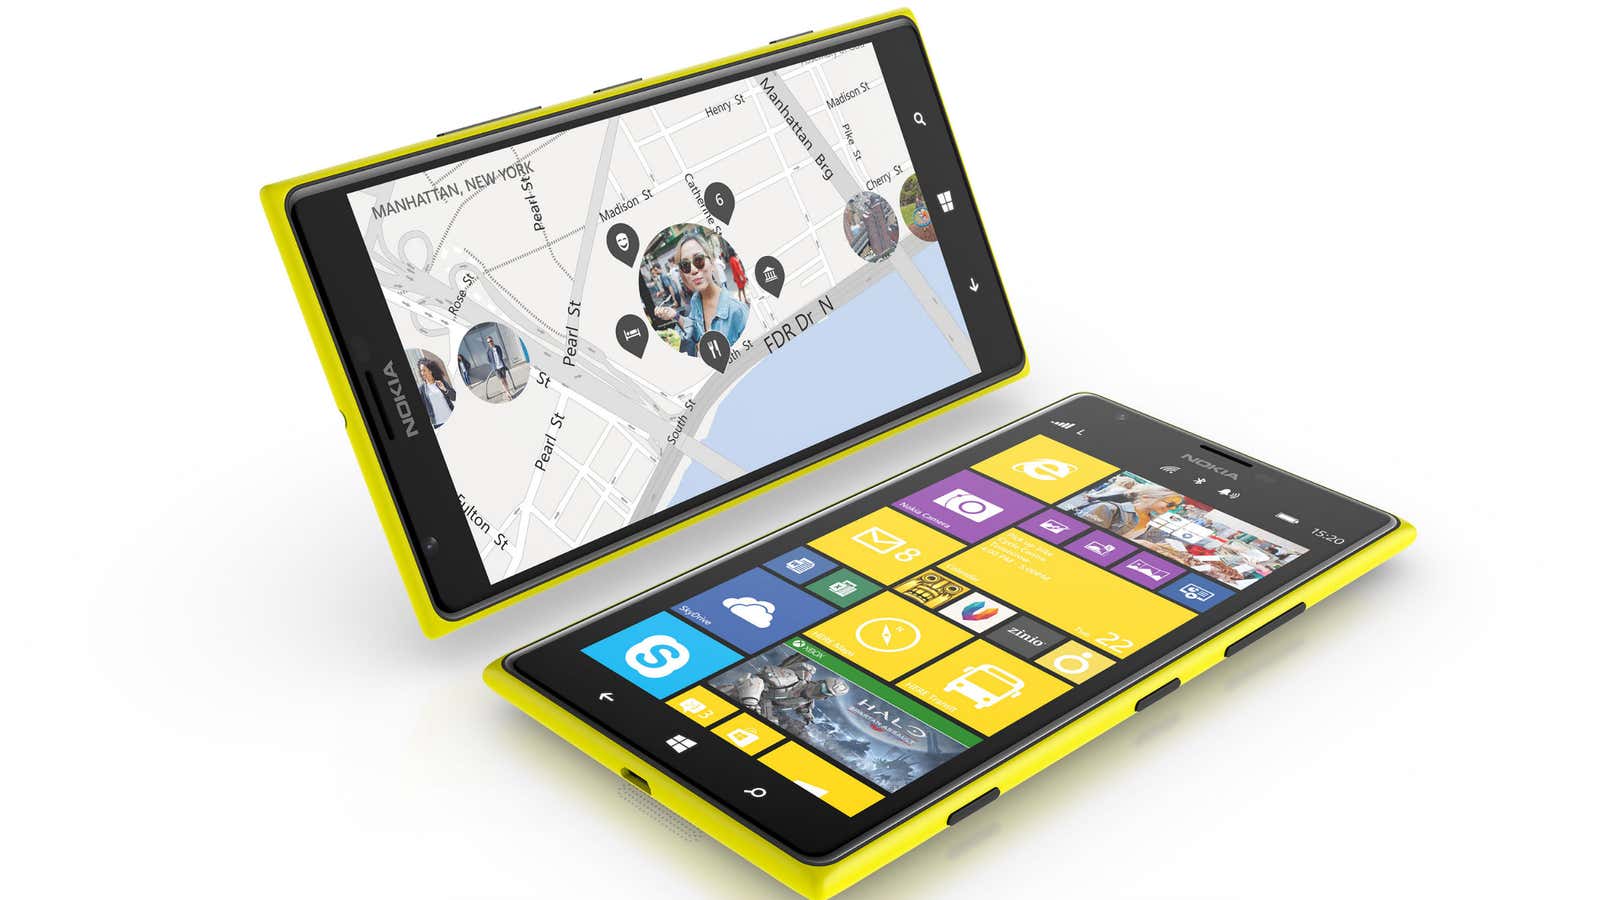 Astonishingly, Windows Phone is one of the possible alternatives.